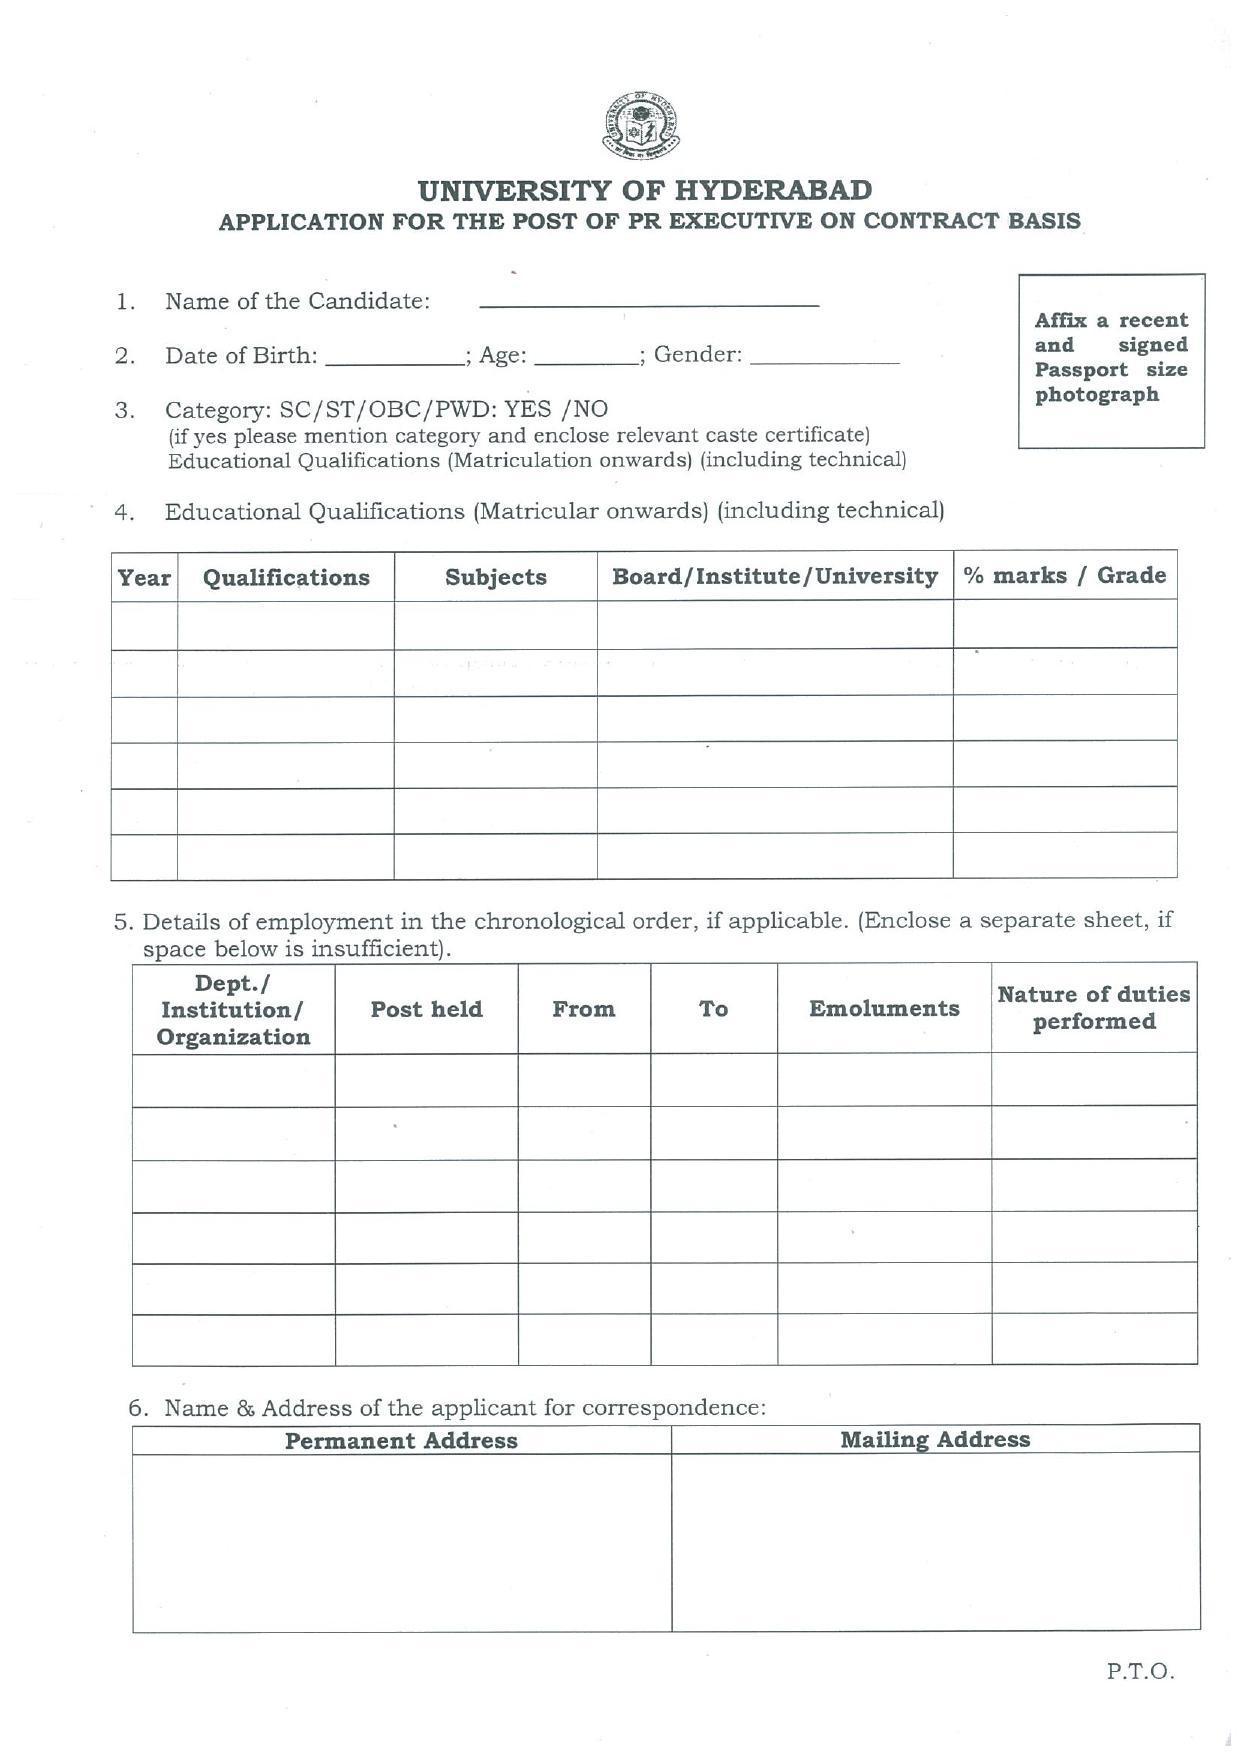 University of Hyderabad Invites Application for PR Executive Recruitment 2022 - Page 1